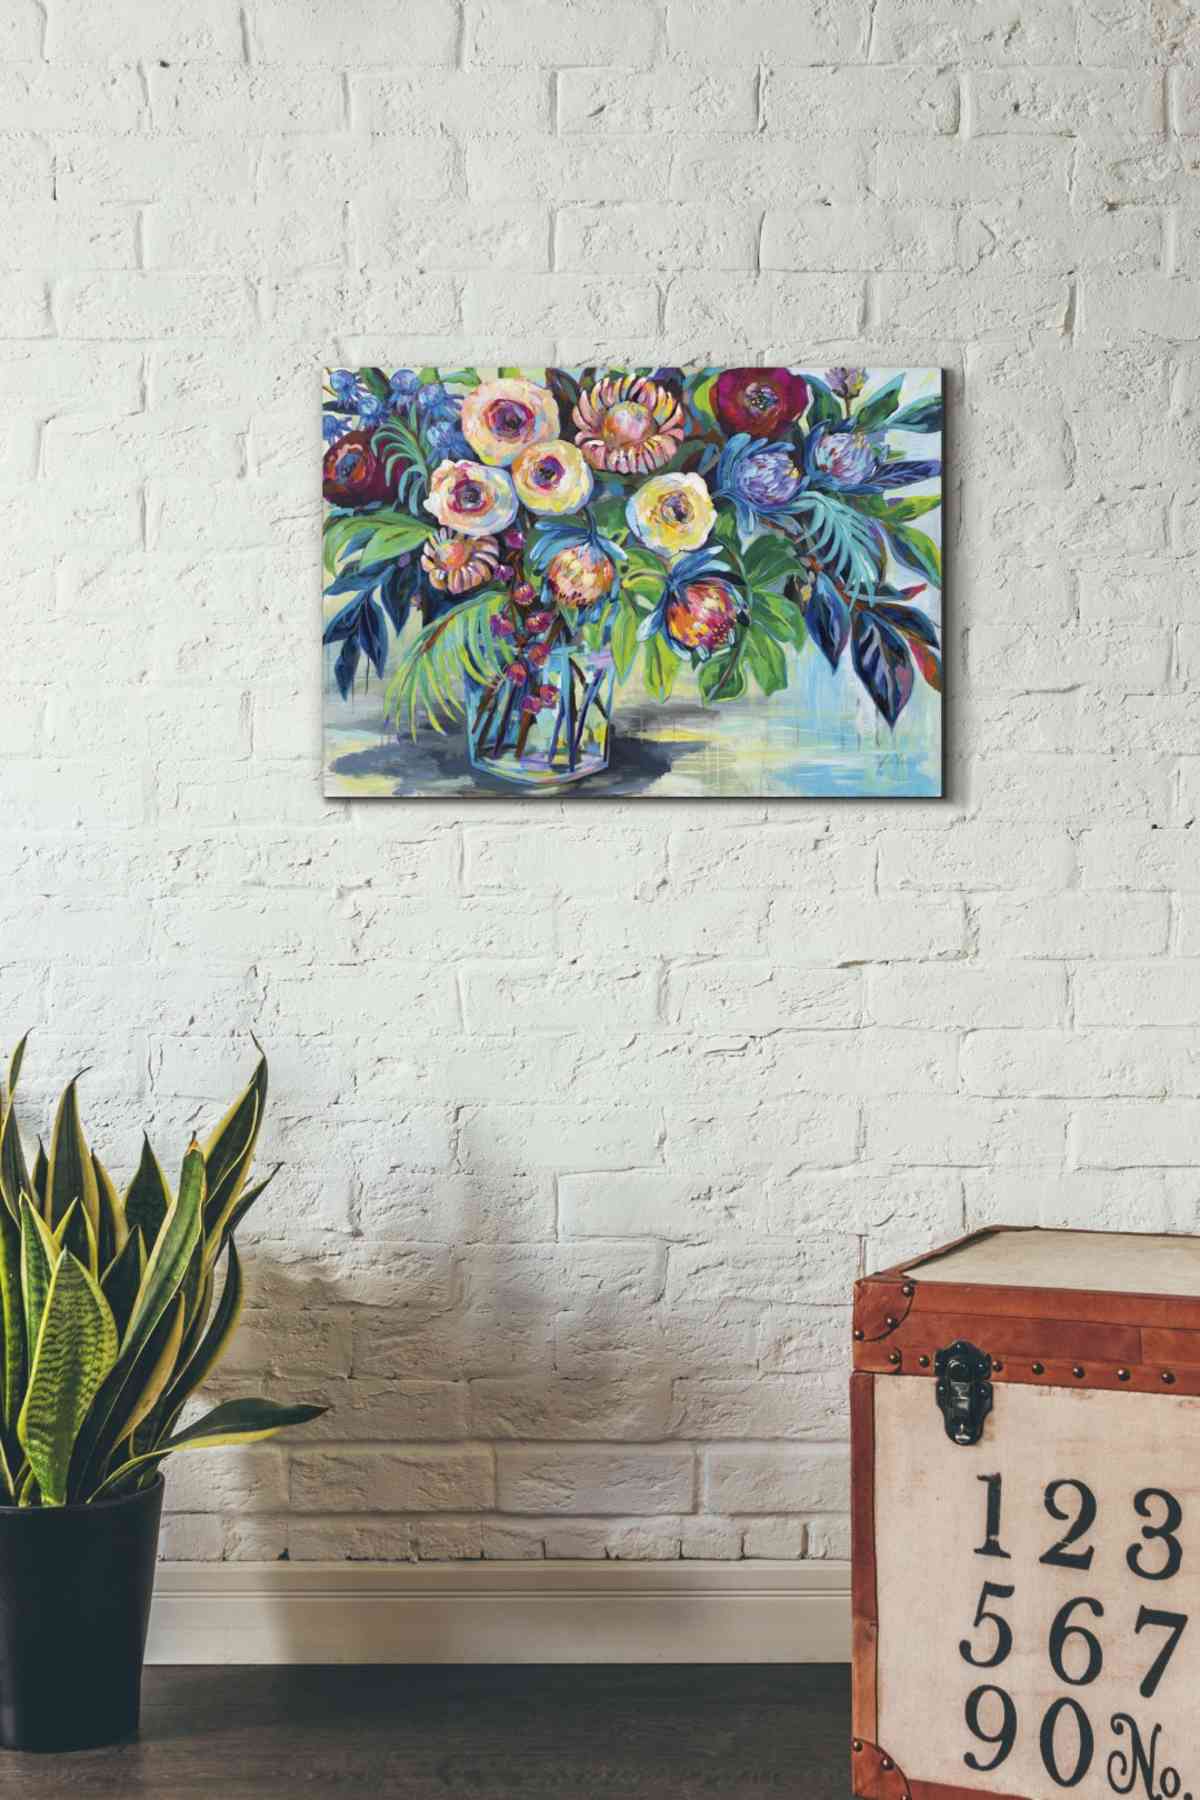 Giclee Canvas Wall Art Key West by Jeanette Vertentes